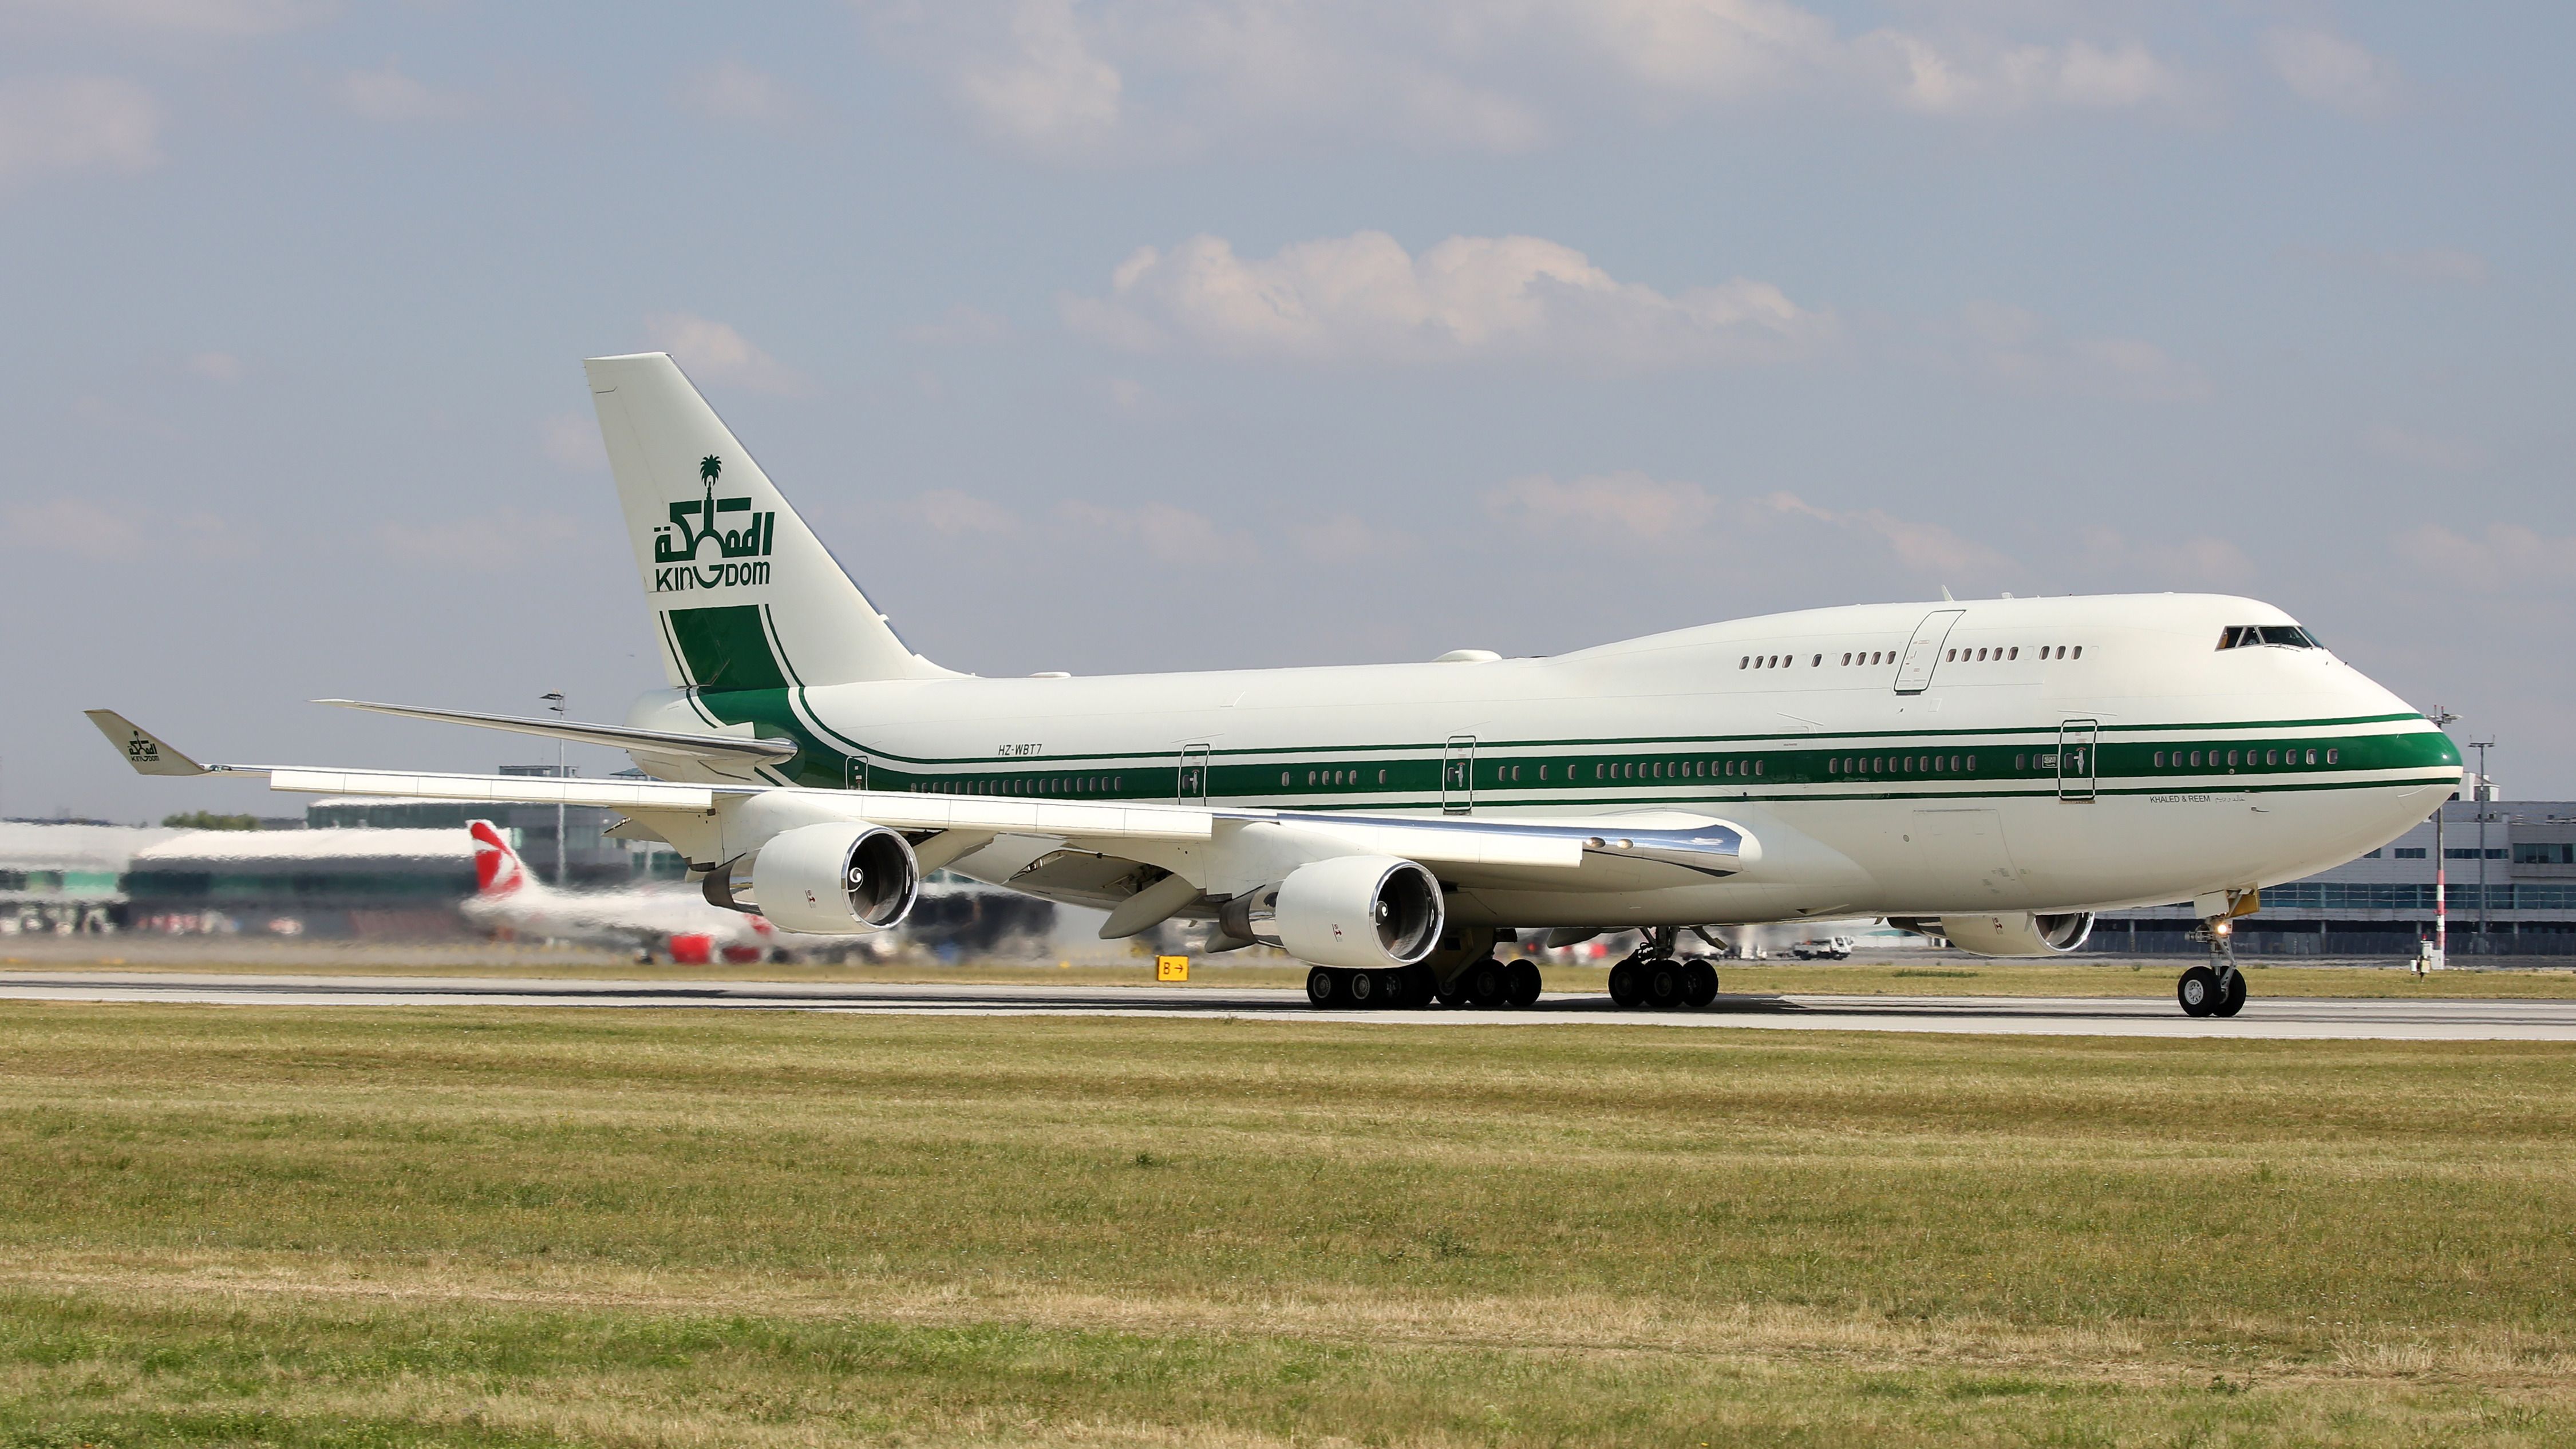 Prince Talal's Boeing 747 on a taxiway.